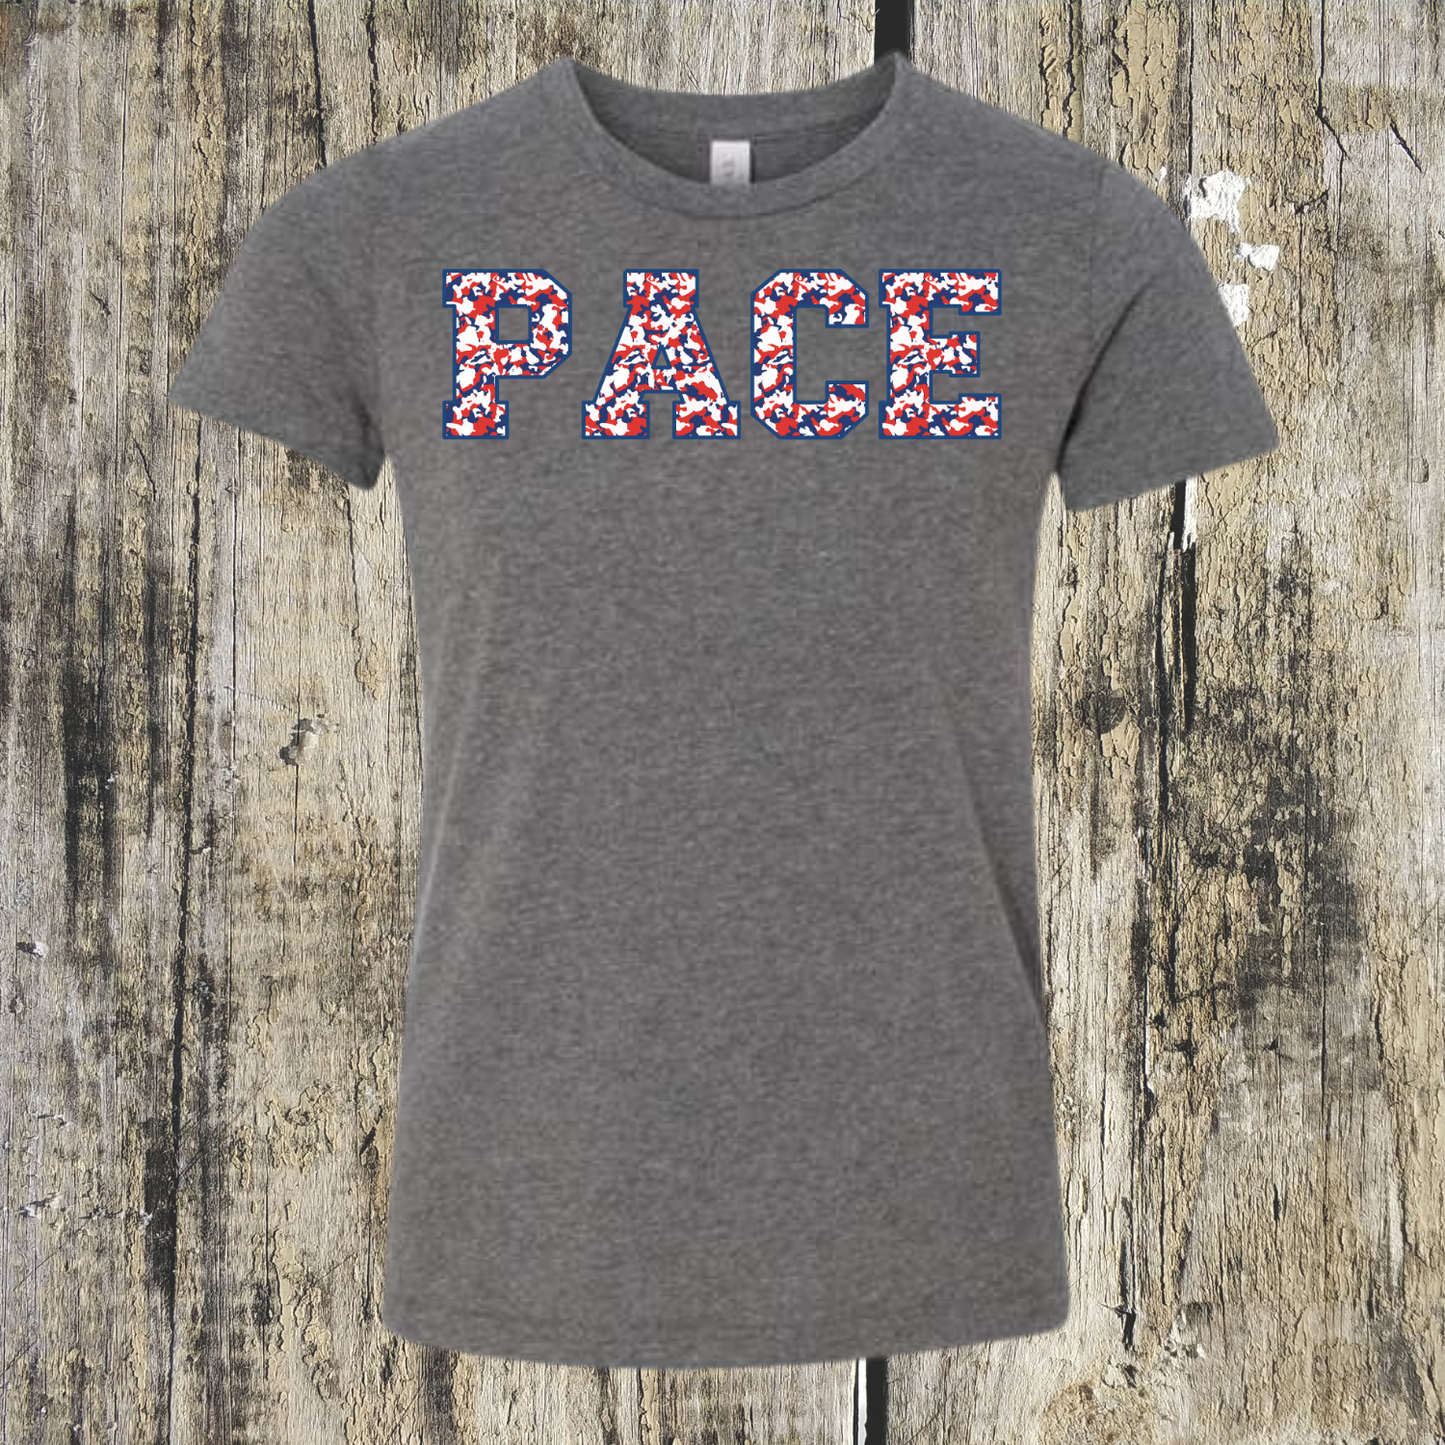 Pace Red + White + Blue Camo Tee